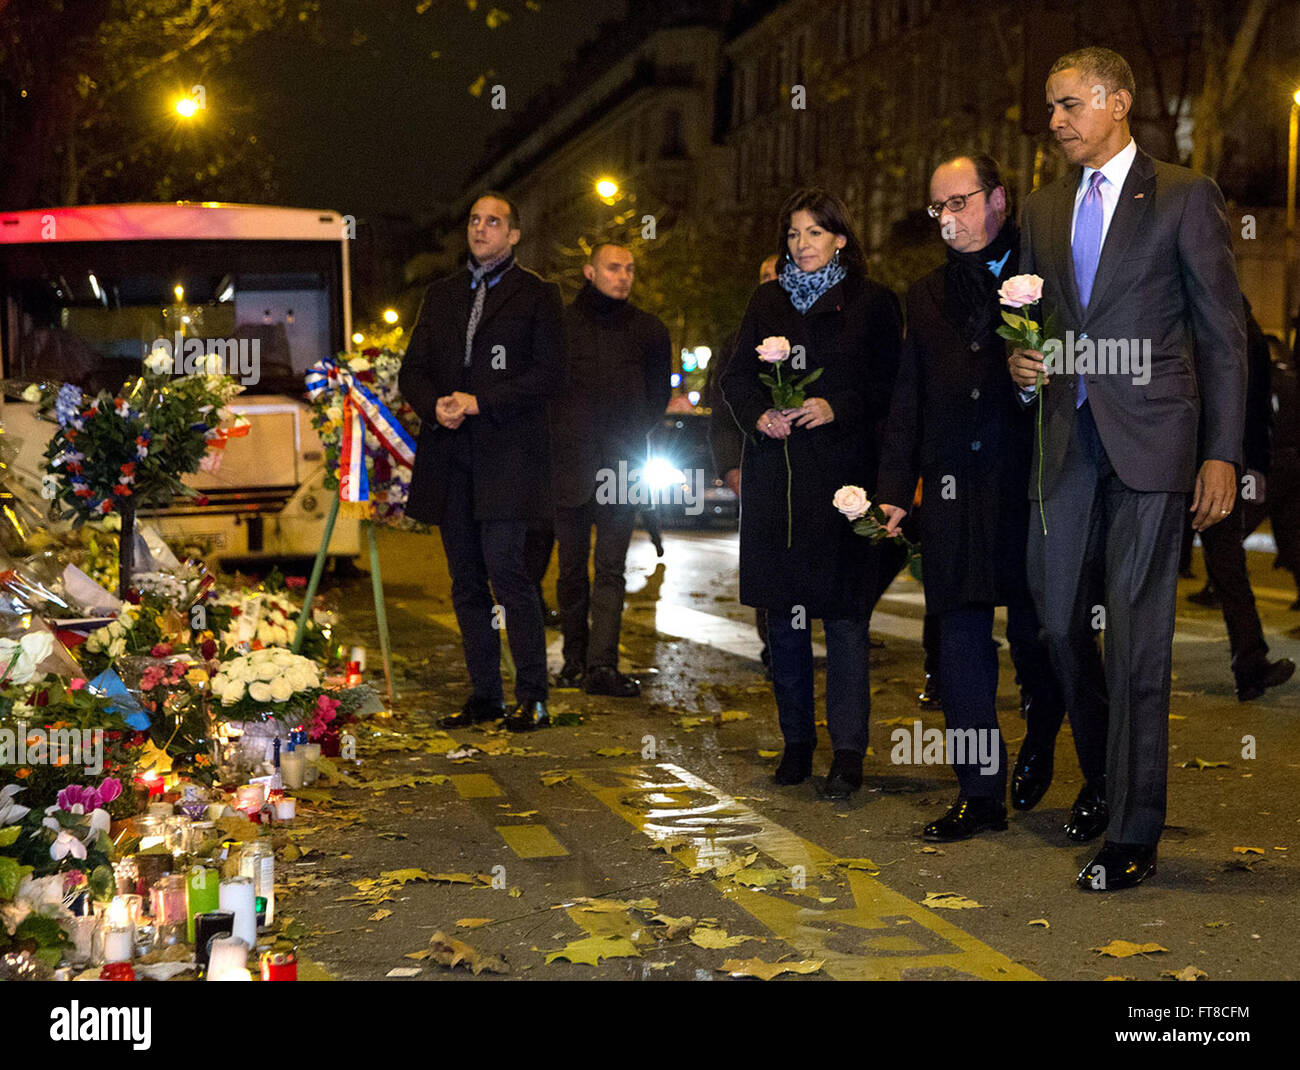 Nov. 30, 2015 'After arriving in France to attend the Climate Change Summit, the President, with French President François Hollande and Paris Mayor Anne Hidalgo, made an unannounced stop just after midnight at the memorial in front of le Batacian, the site of a Paris terrorist attack.' (Official White House Photo by Pete Souza) Stock Photo